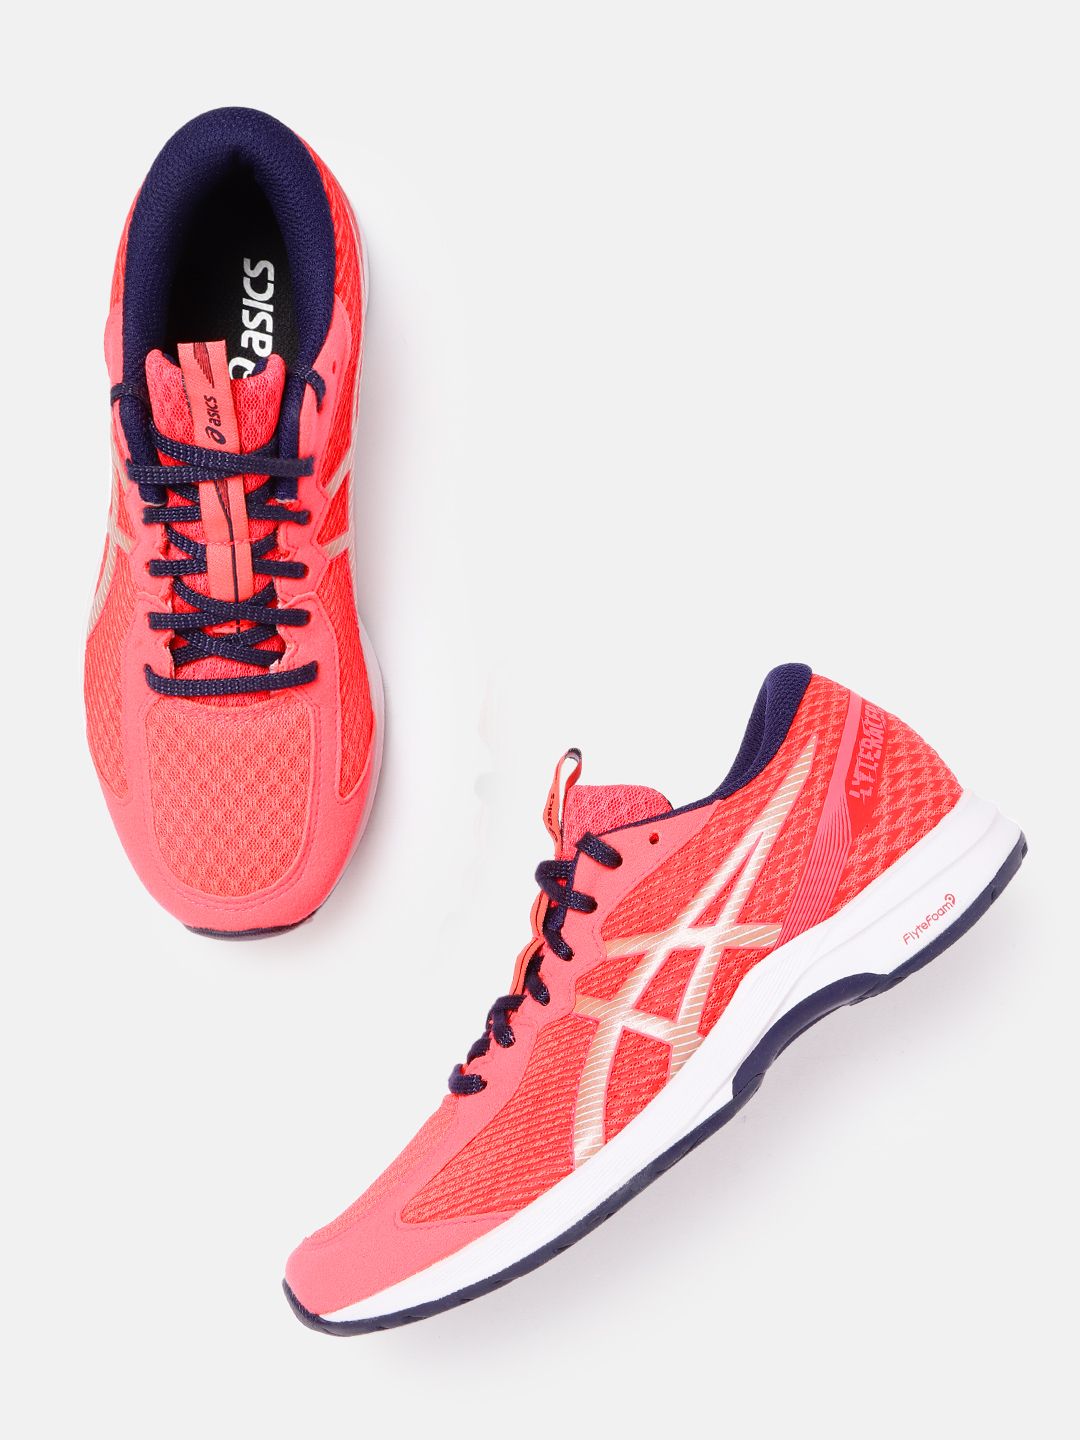 ASICS Women Coral Pink Woven Design Lyteracer 2 Running Shoes Price in India